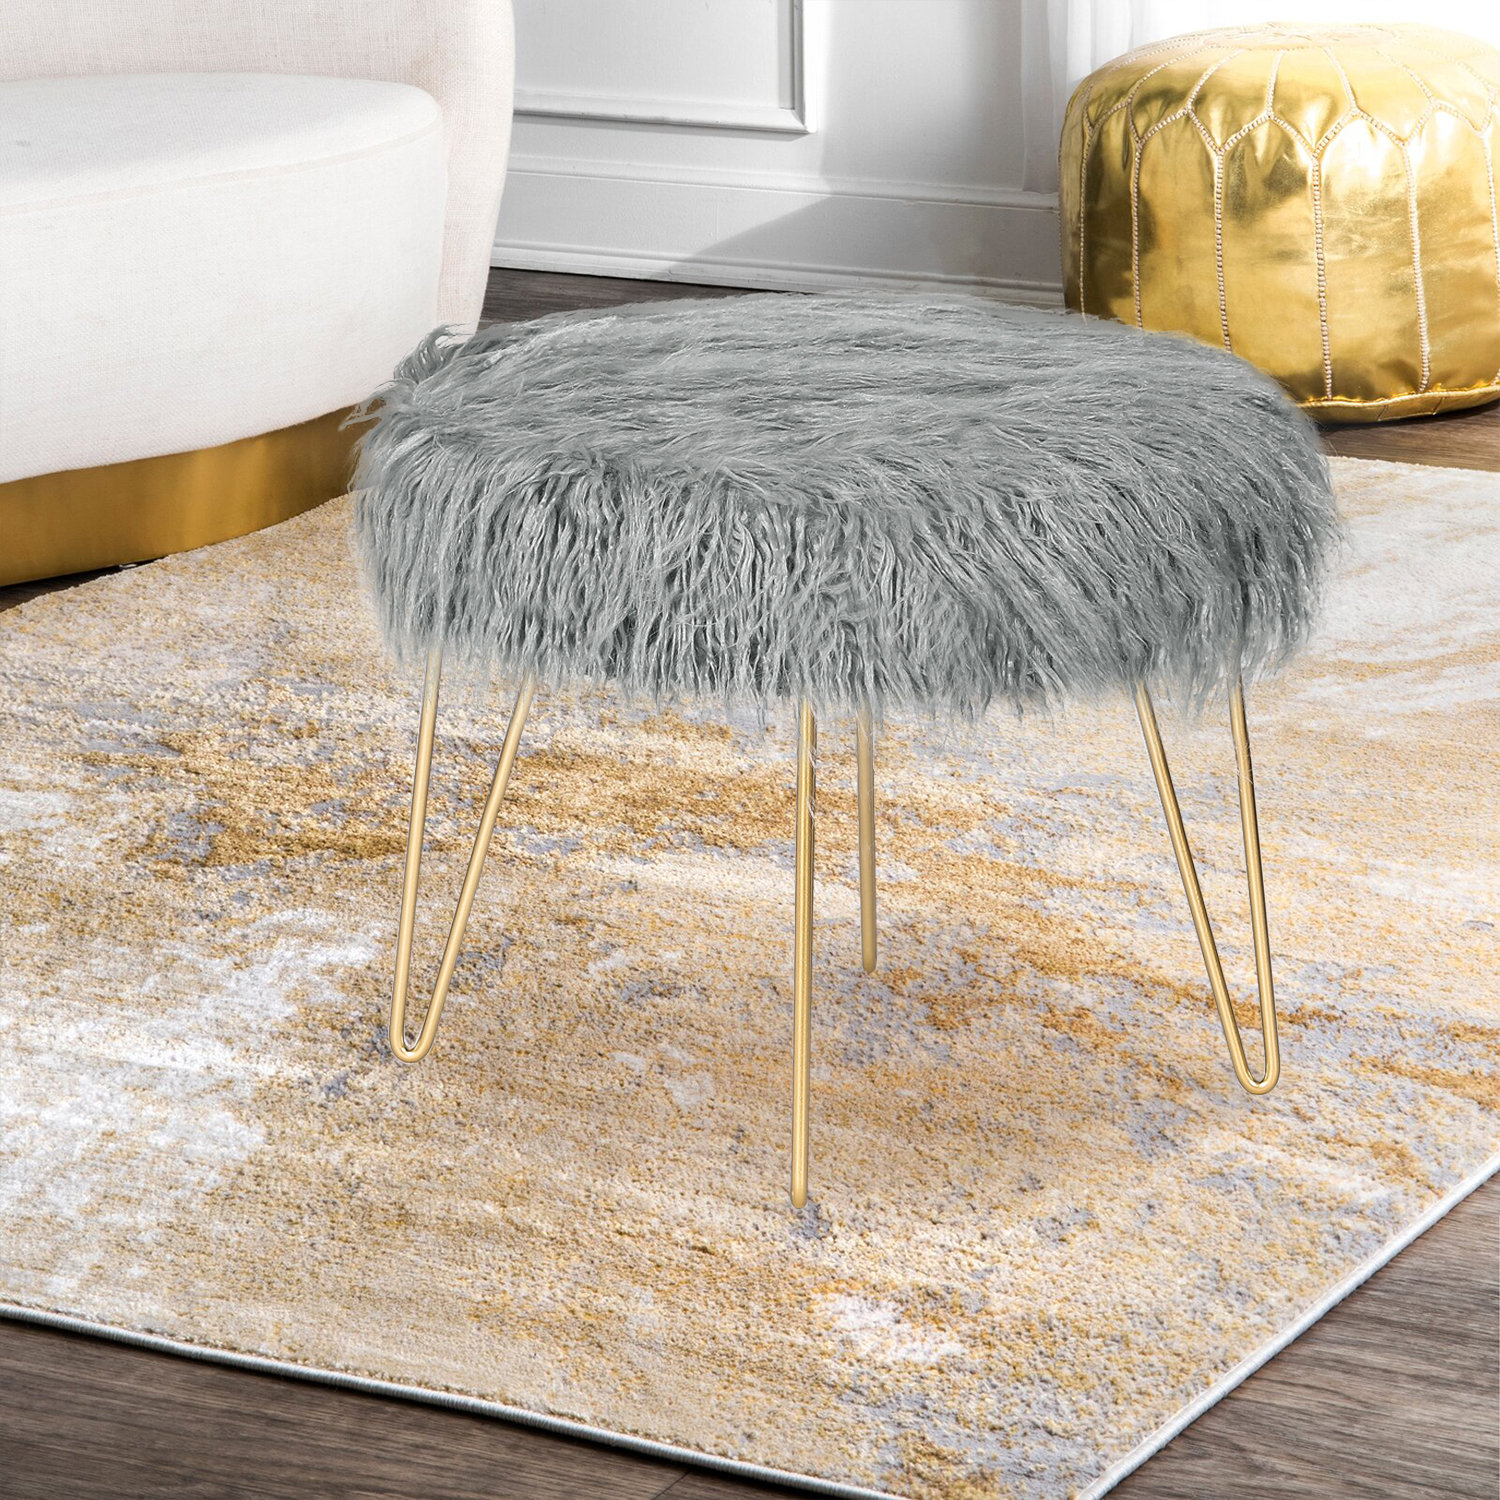 Modern Faux Fur Ottoman Footrest Stool Foot Rest Small Chair Seat Sofa  Couch